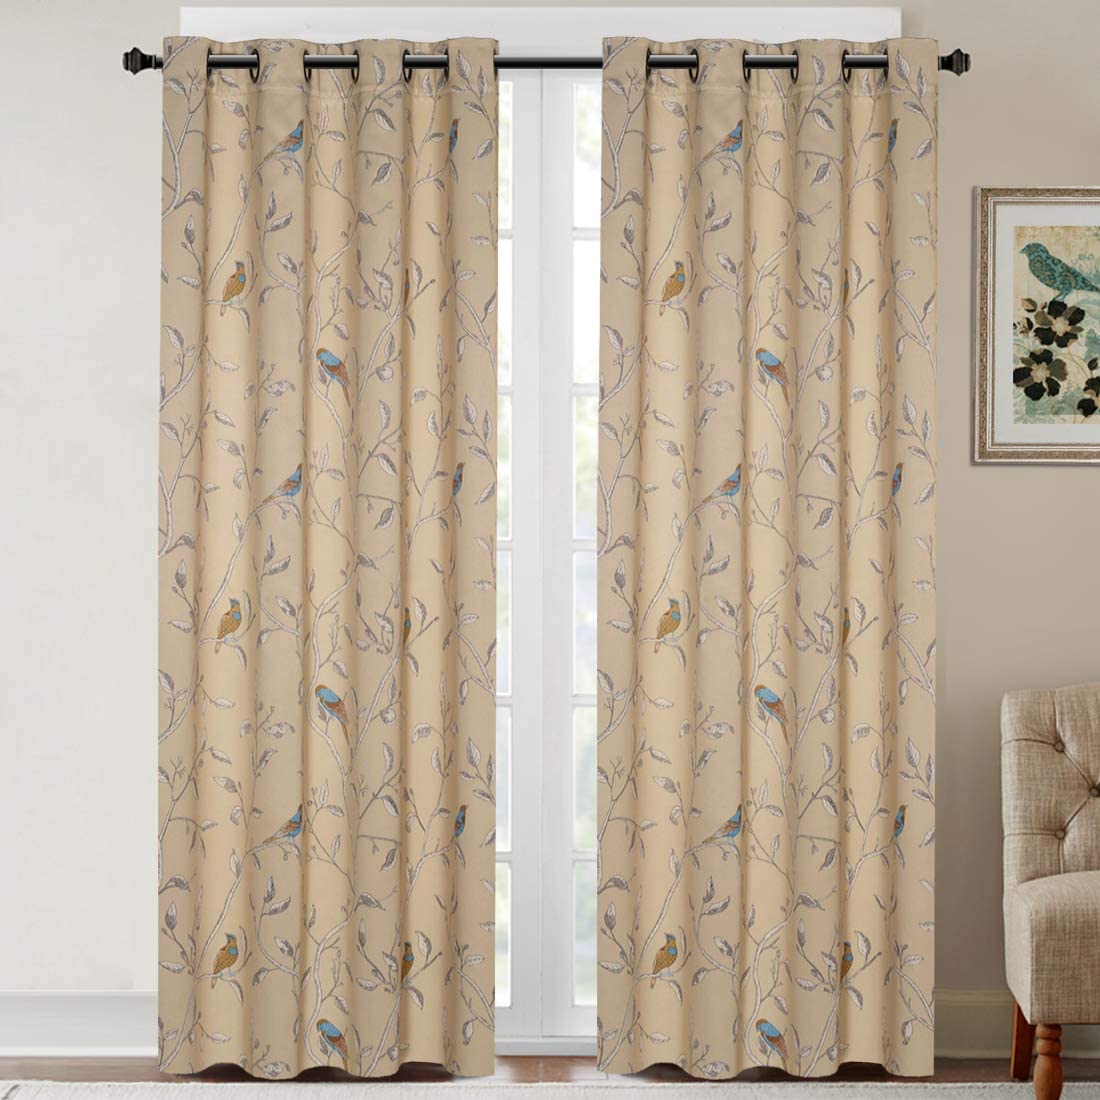 7 Best Thermal Curtains For Insulation (2020) | Heavy.com